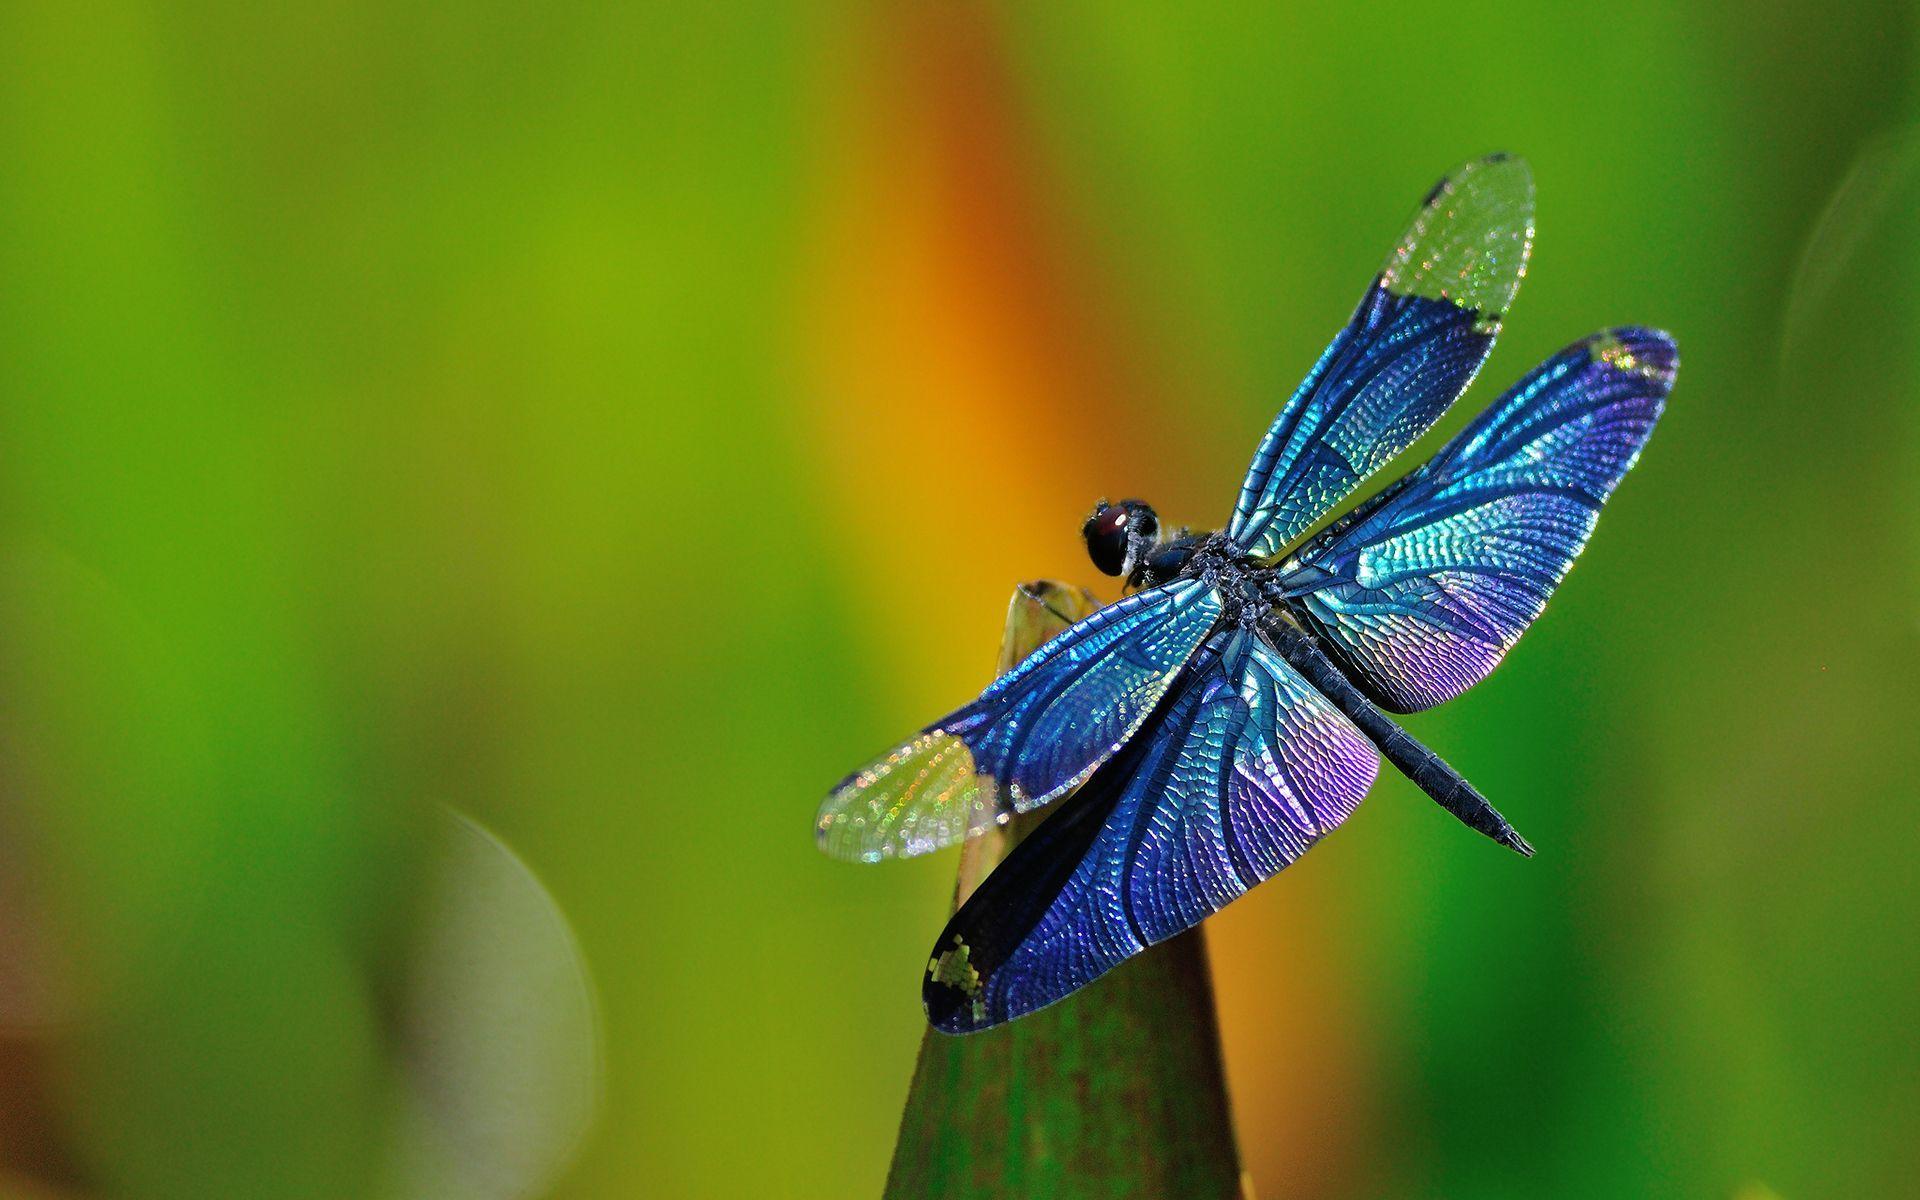 (1920×1200). Bugs. Dragonflies, Insects